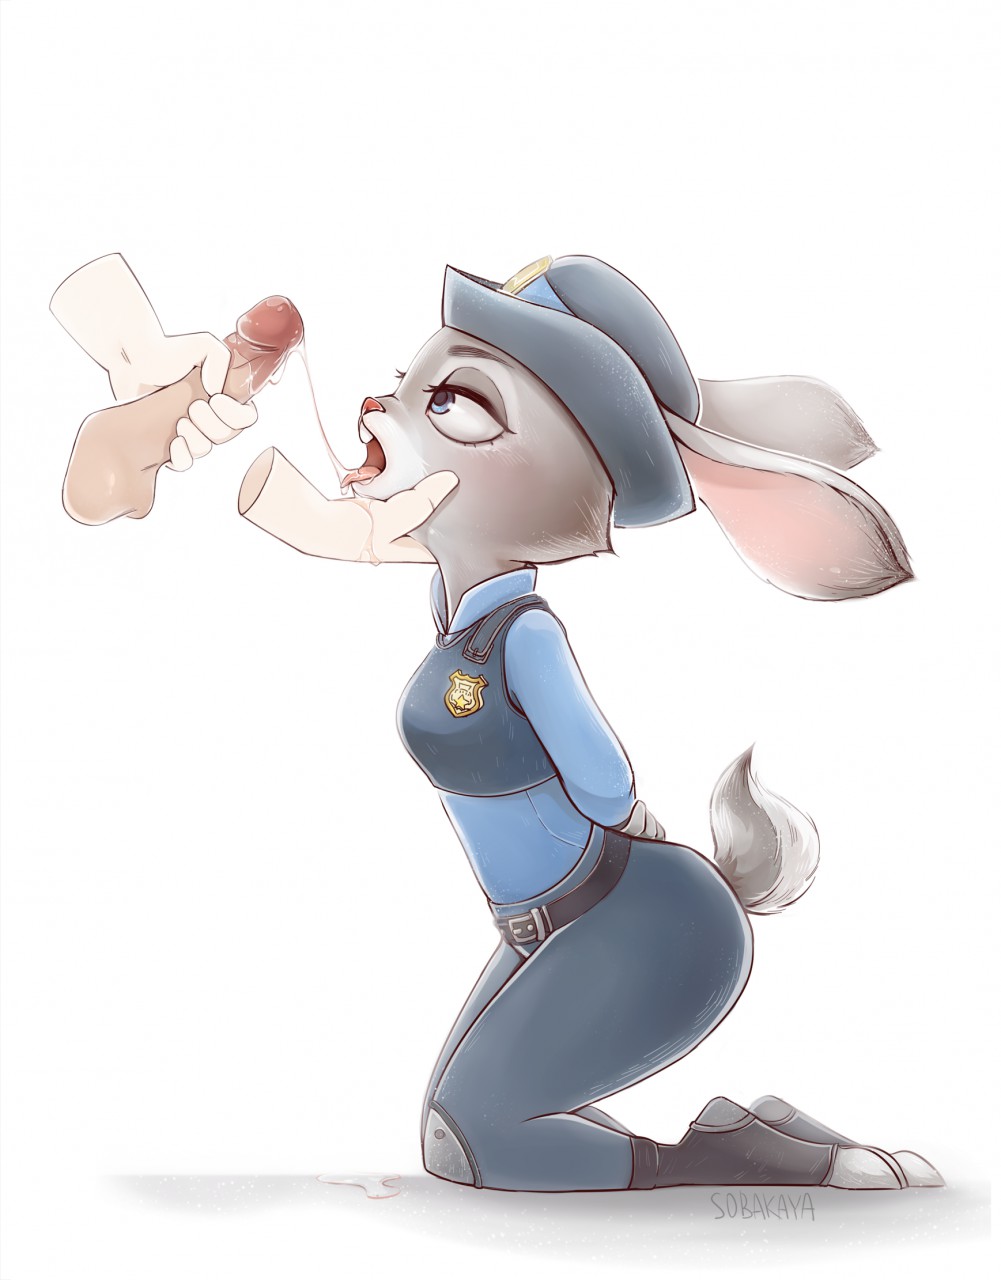 Judy hopps is the first bunny ever to join zootopia's police departmen...